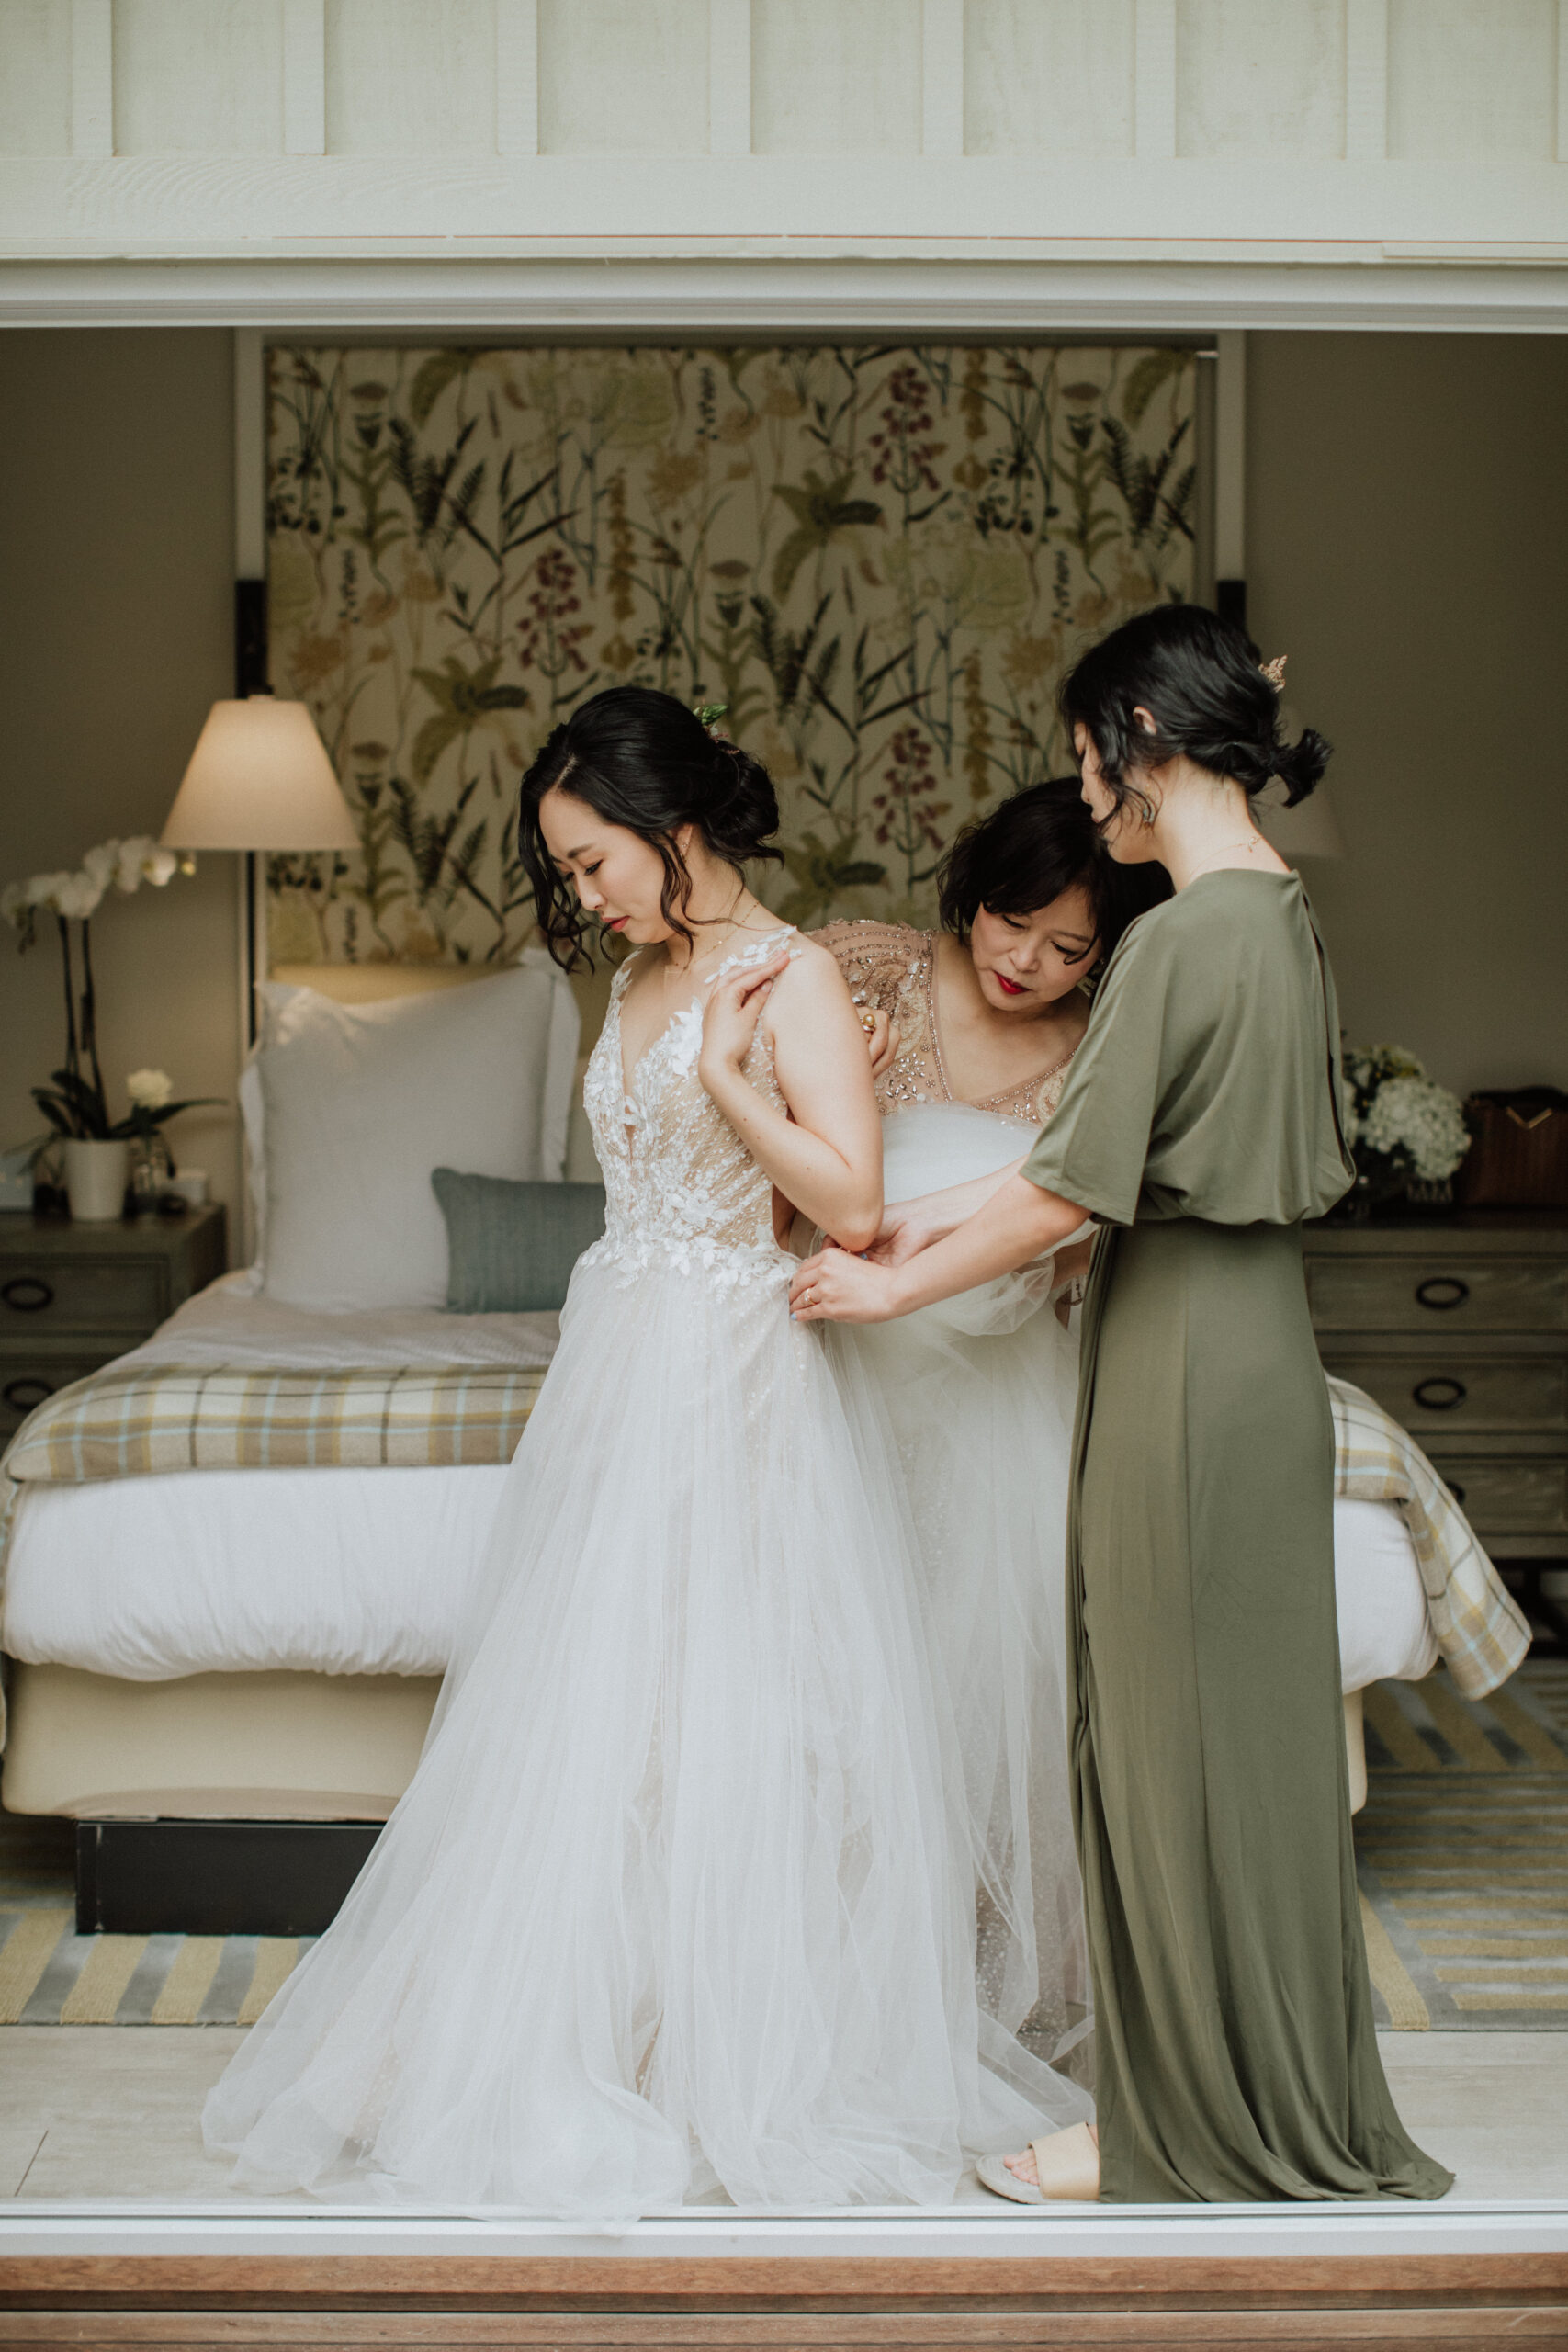 Stunning bride gets ready for her wedding day at her Napa valley vineyard wedding venue